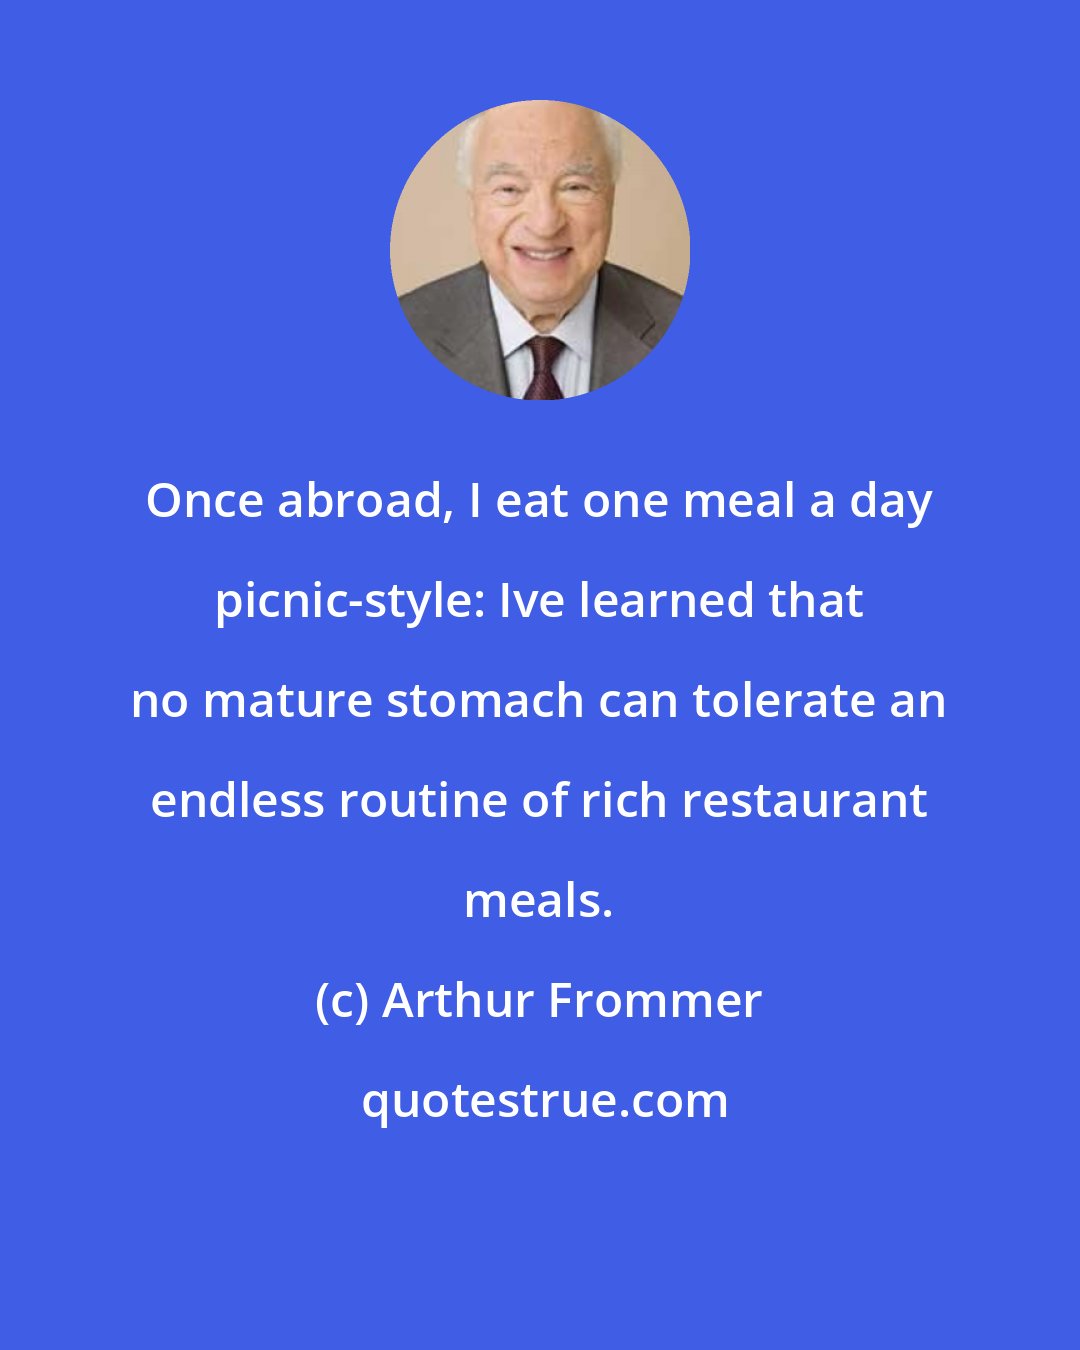 Arthur Frommer: Once abroad, I eat one meal a day picnic-style: Ive learned that no mature stomach can tolerate an endless routine of rich restaurant meals.